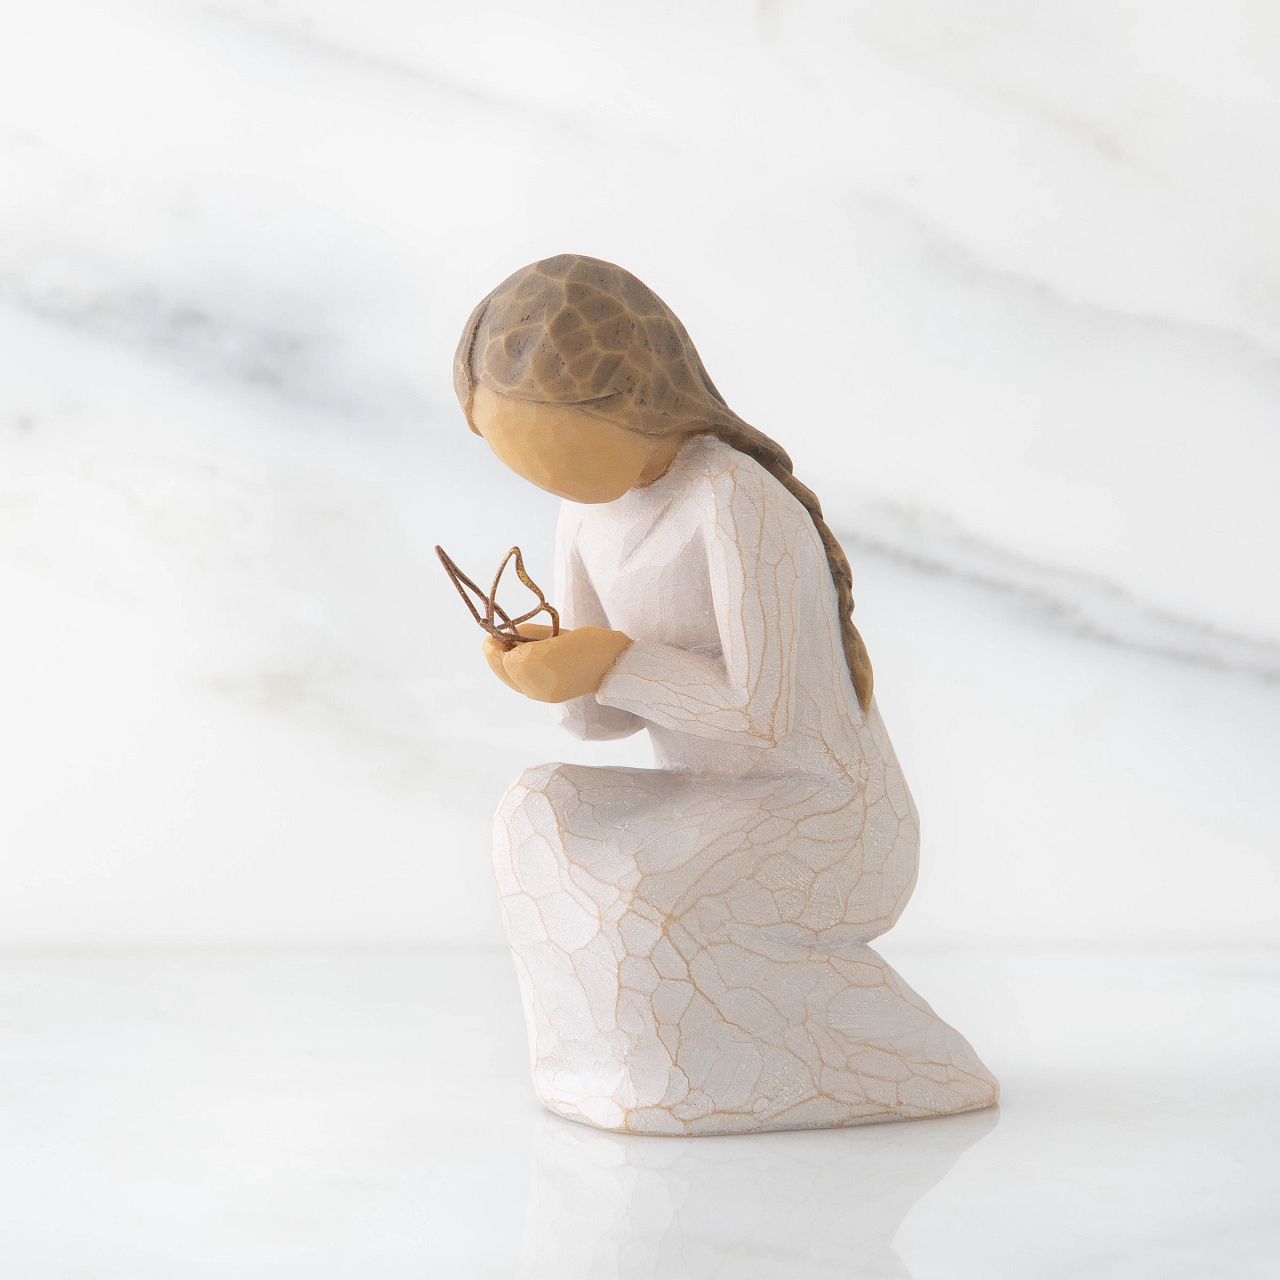 Quiet Wonder by Willow Tree  This figure includes a gift tag with the sentiment 'May quiet wonders bring you hope' This figure can be a little reminder to yourself, or someone close to you, of revelations and discoveries found in quiet moments when we are still and present.